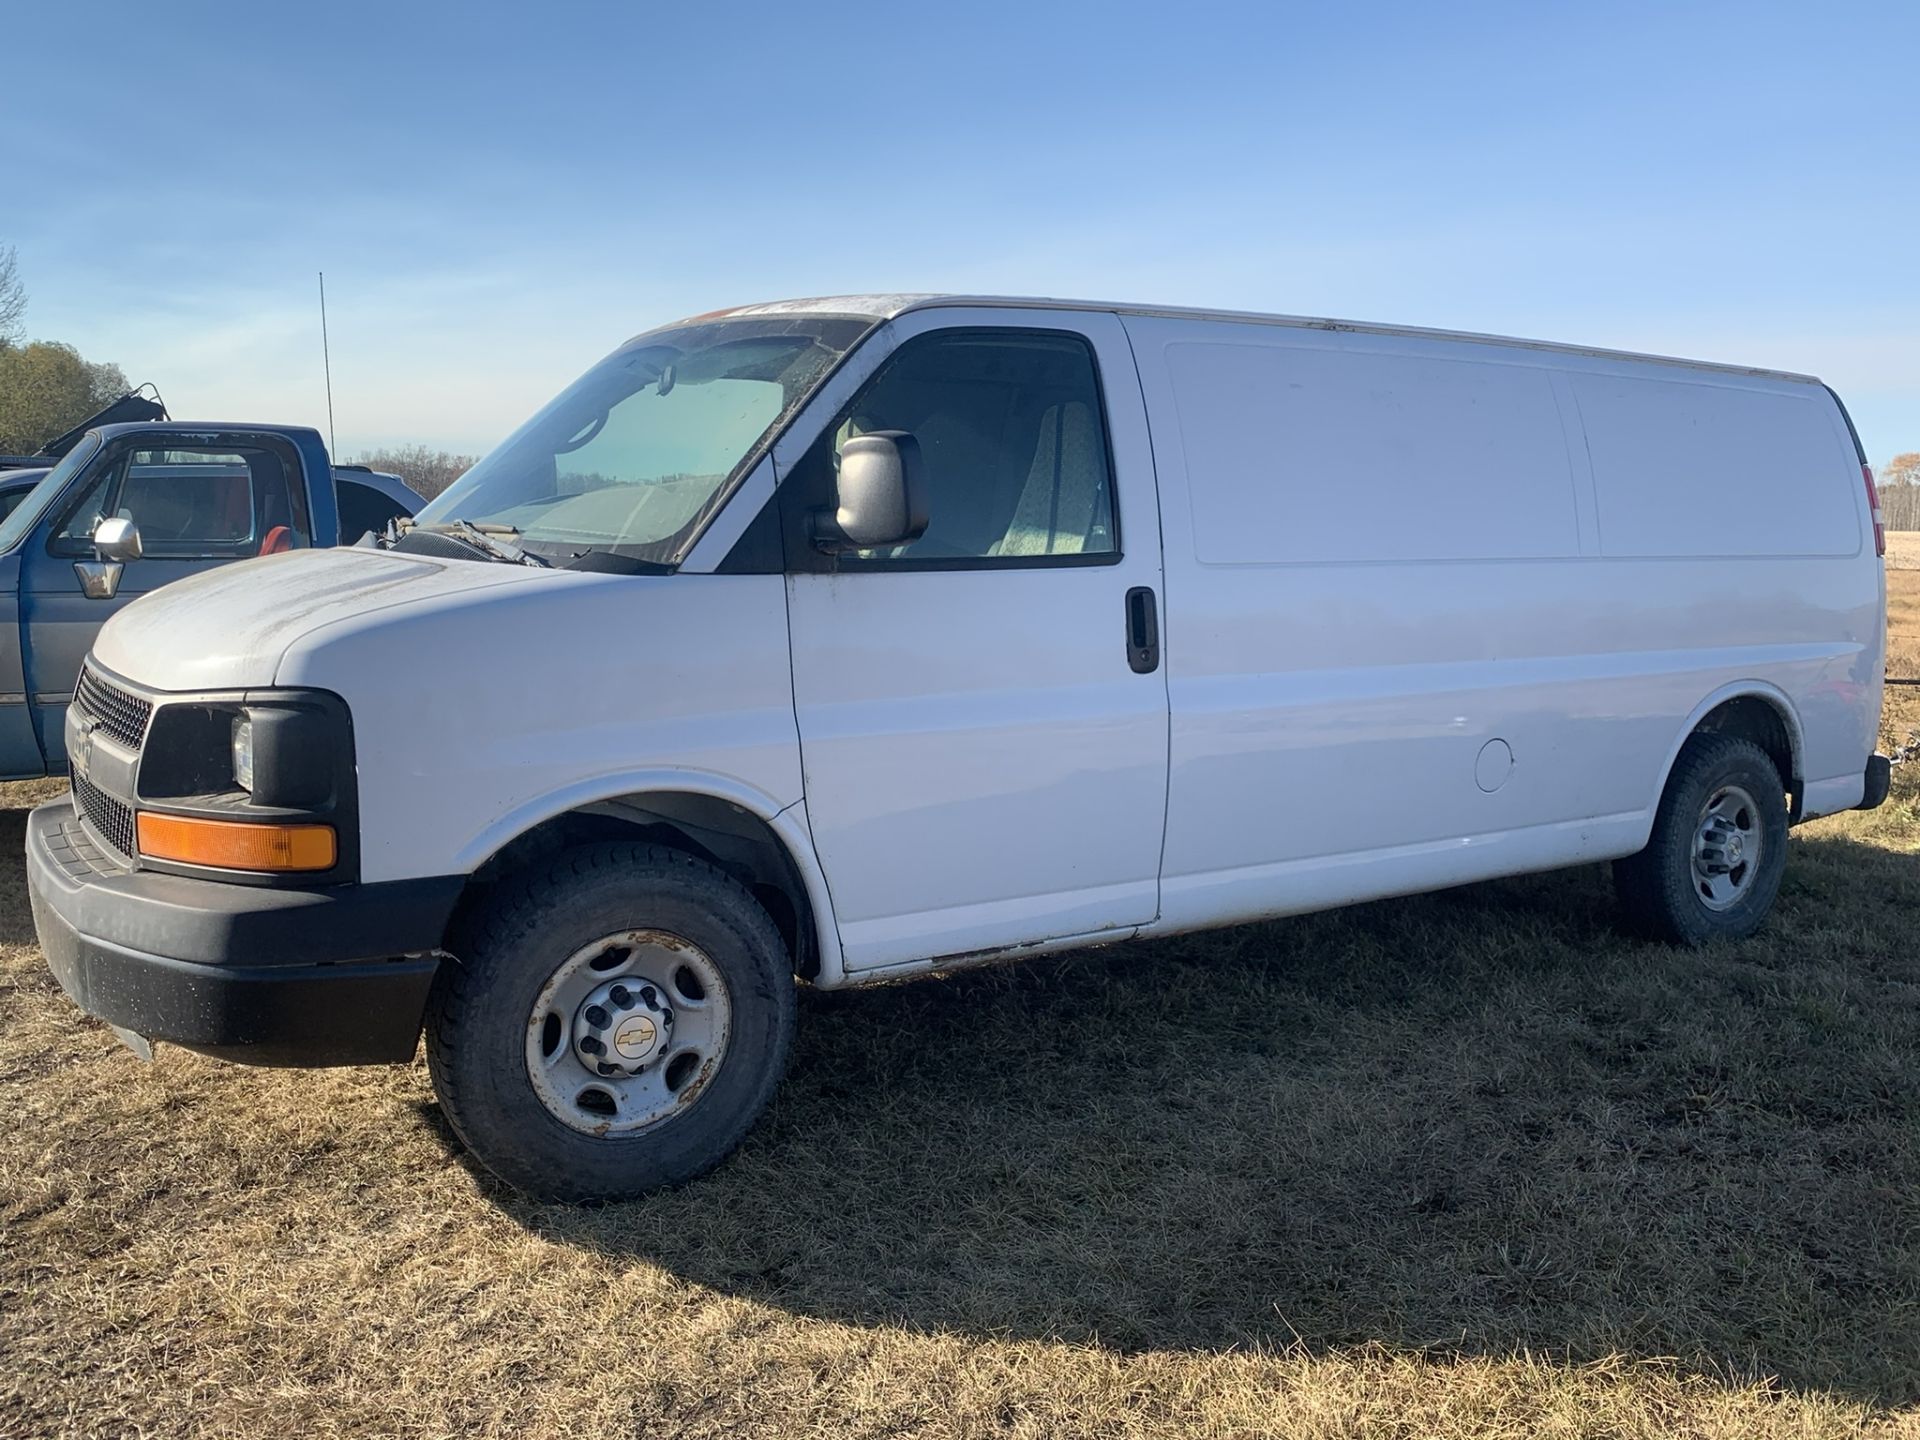 2007 CHEVROLET EXPRESS 2500 CARGO VAN , 2WD, 4.8L LR4 GAS ENG., 266,297 KMS SHOWING - Image 2 of 12